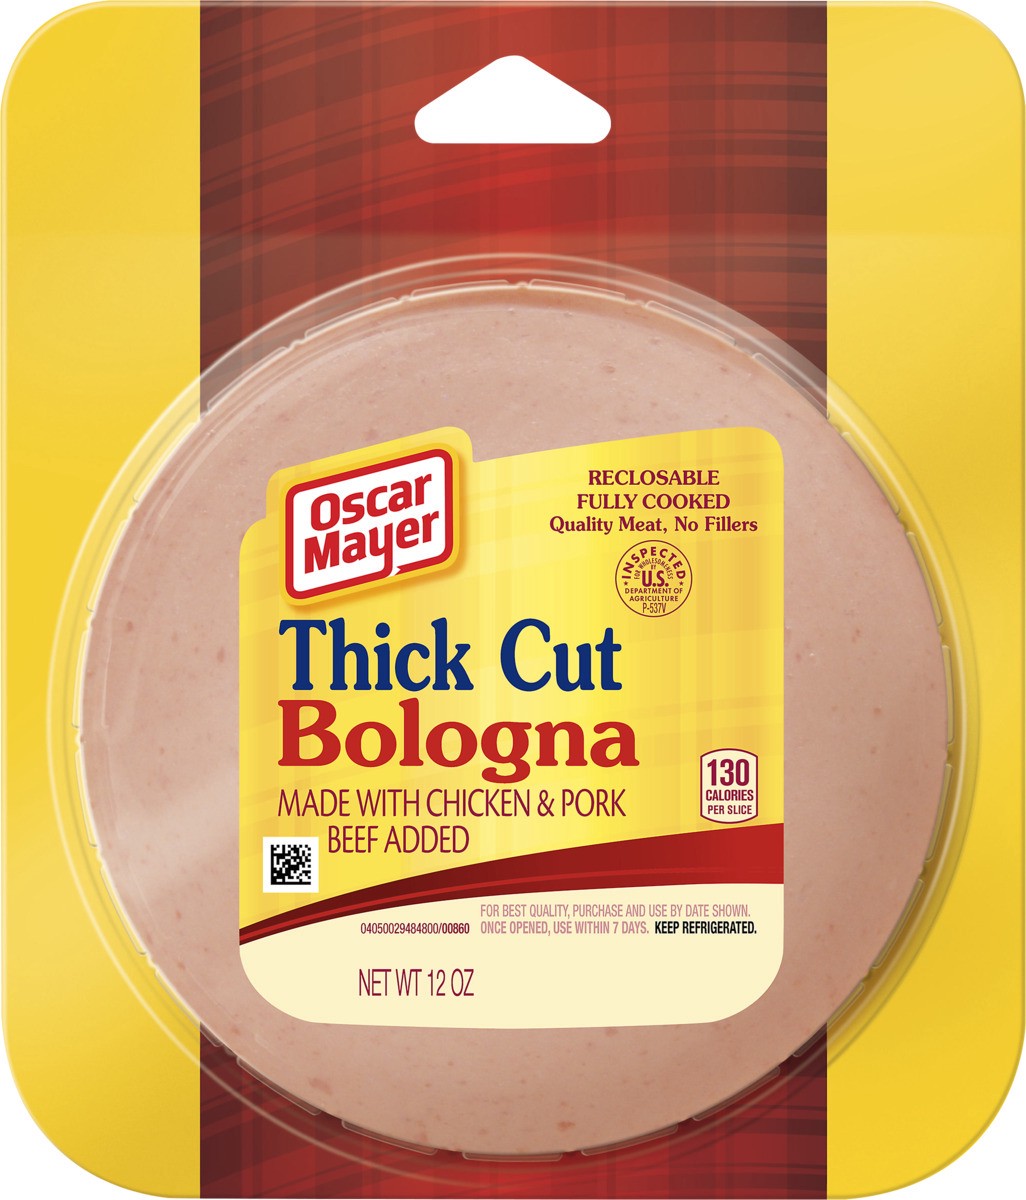 slide 2 of 2, Oscar Mayer Thick Cut Bologna made with chicken & pork, beef added Sliced Lunch Meat, 12 oz. Pack, 12 oz